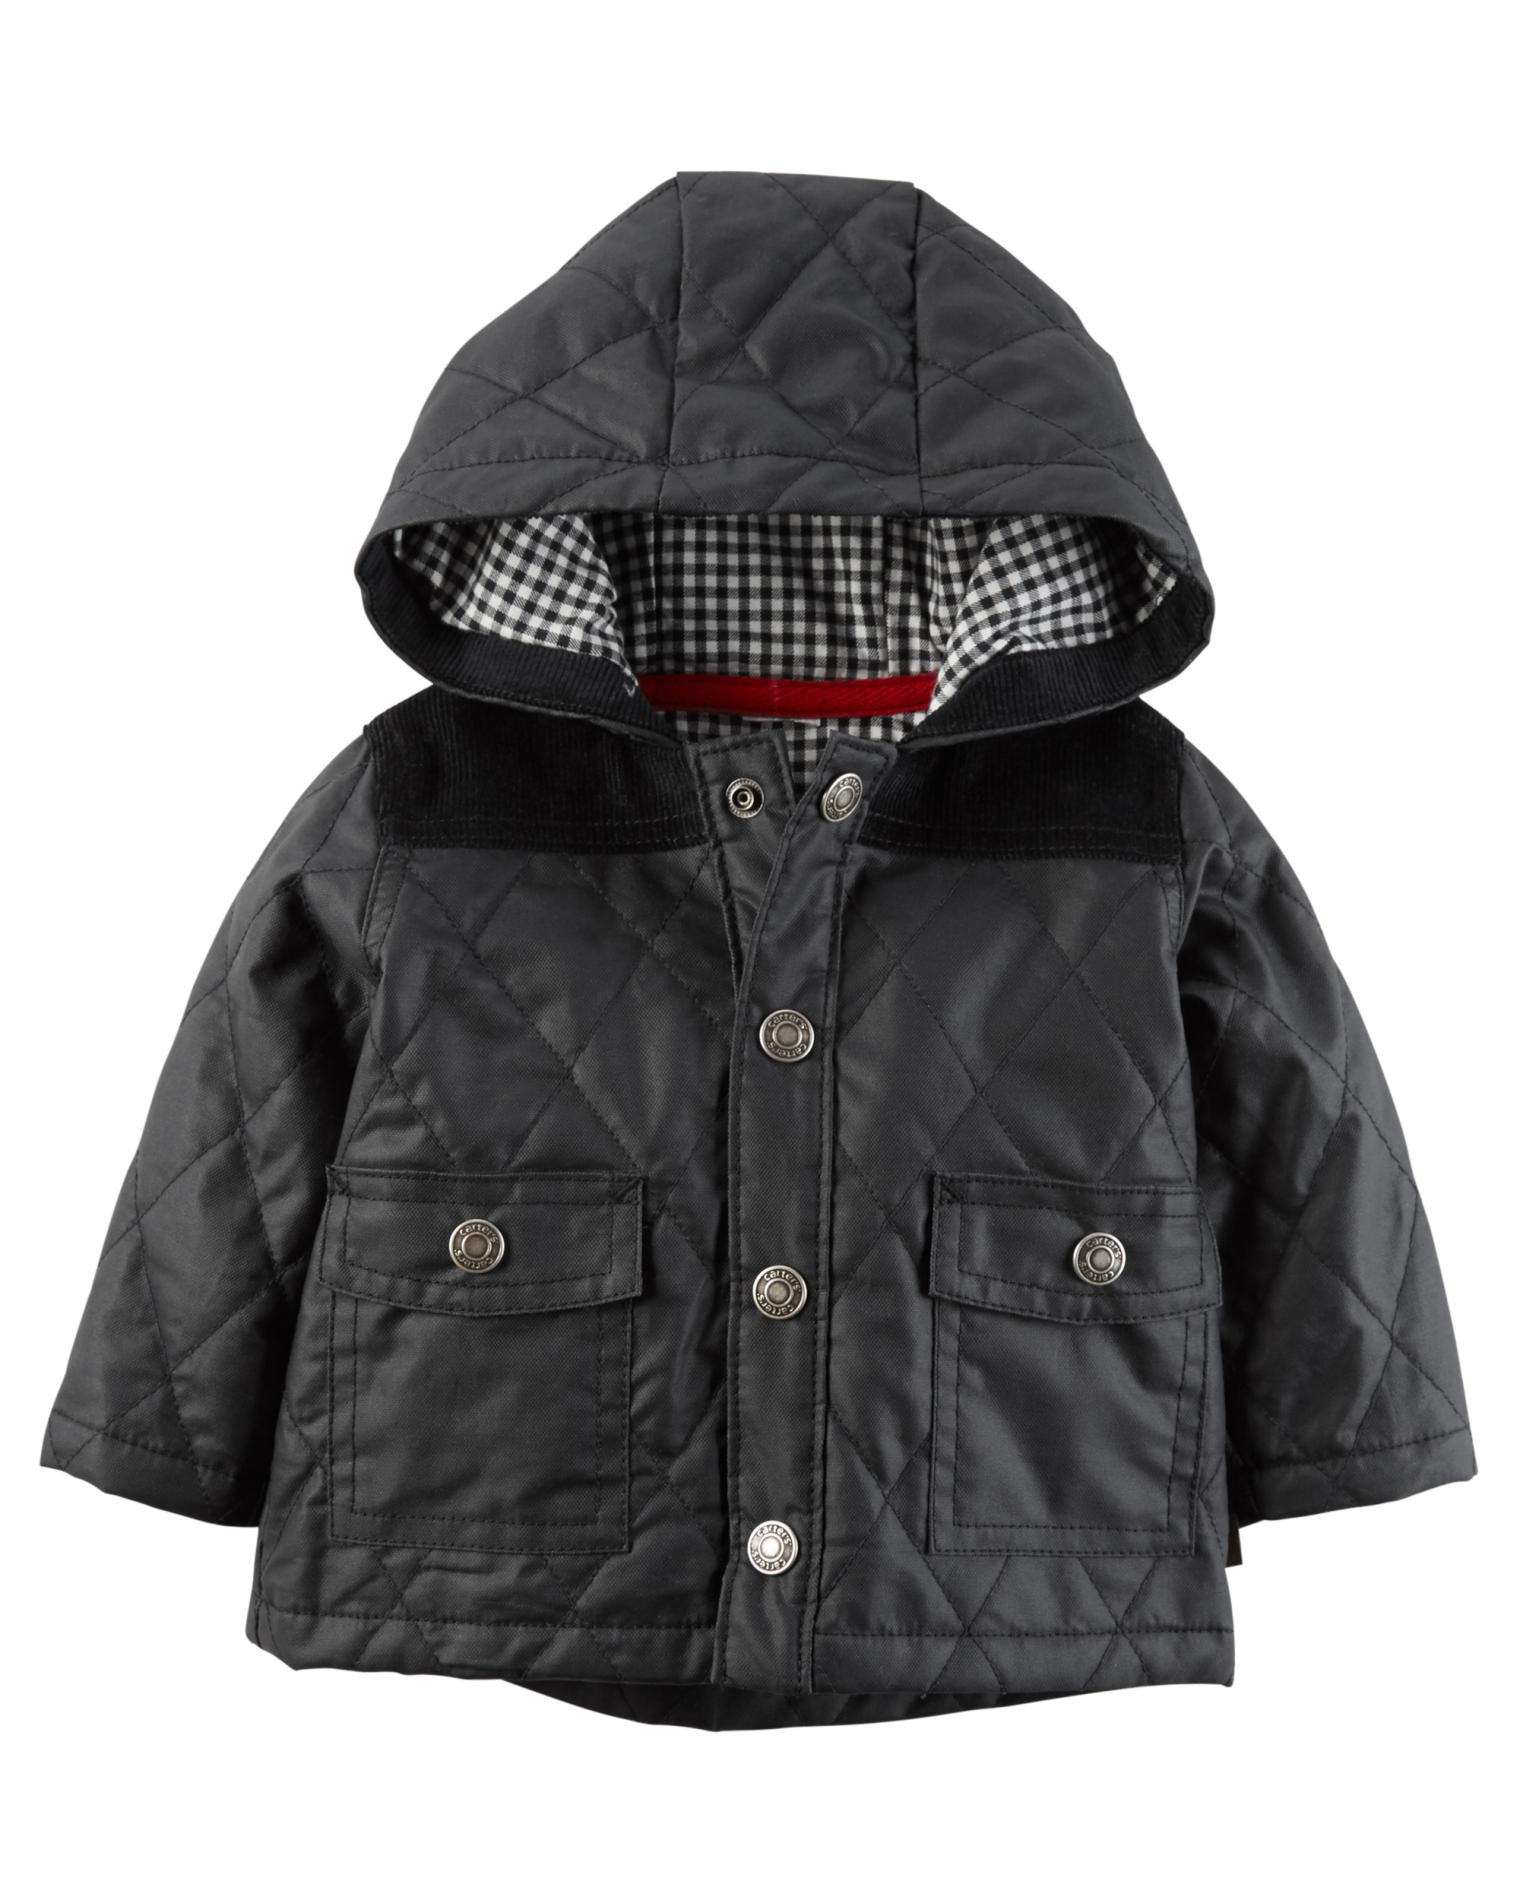 Carter's Newborn & Infant Boys' Quilted Jacket